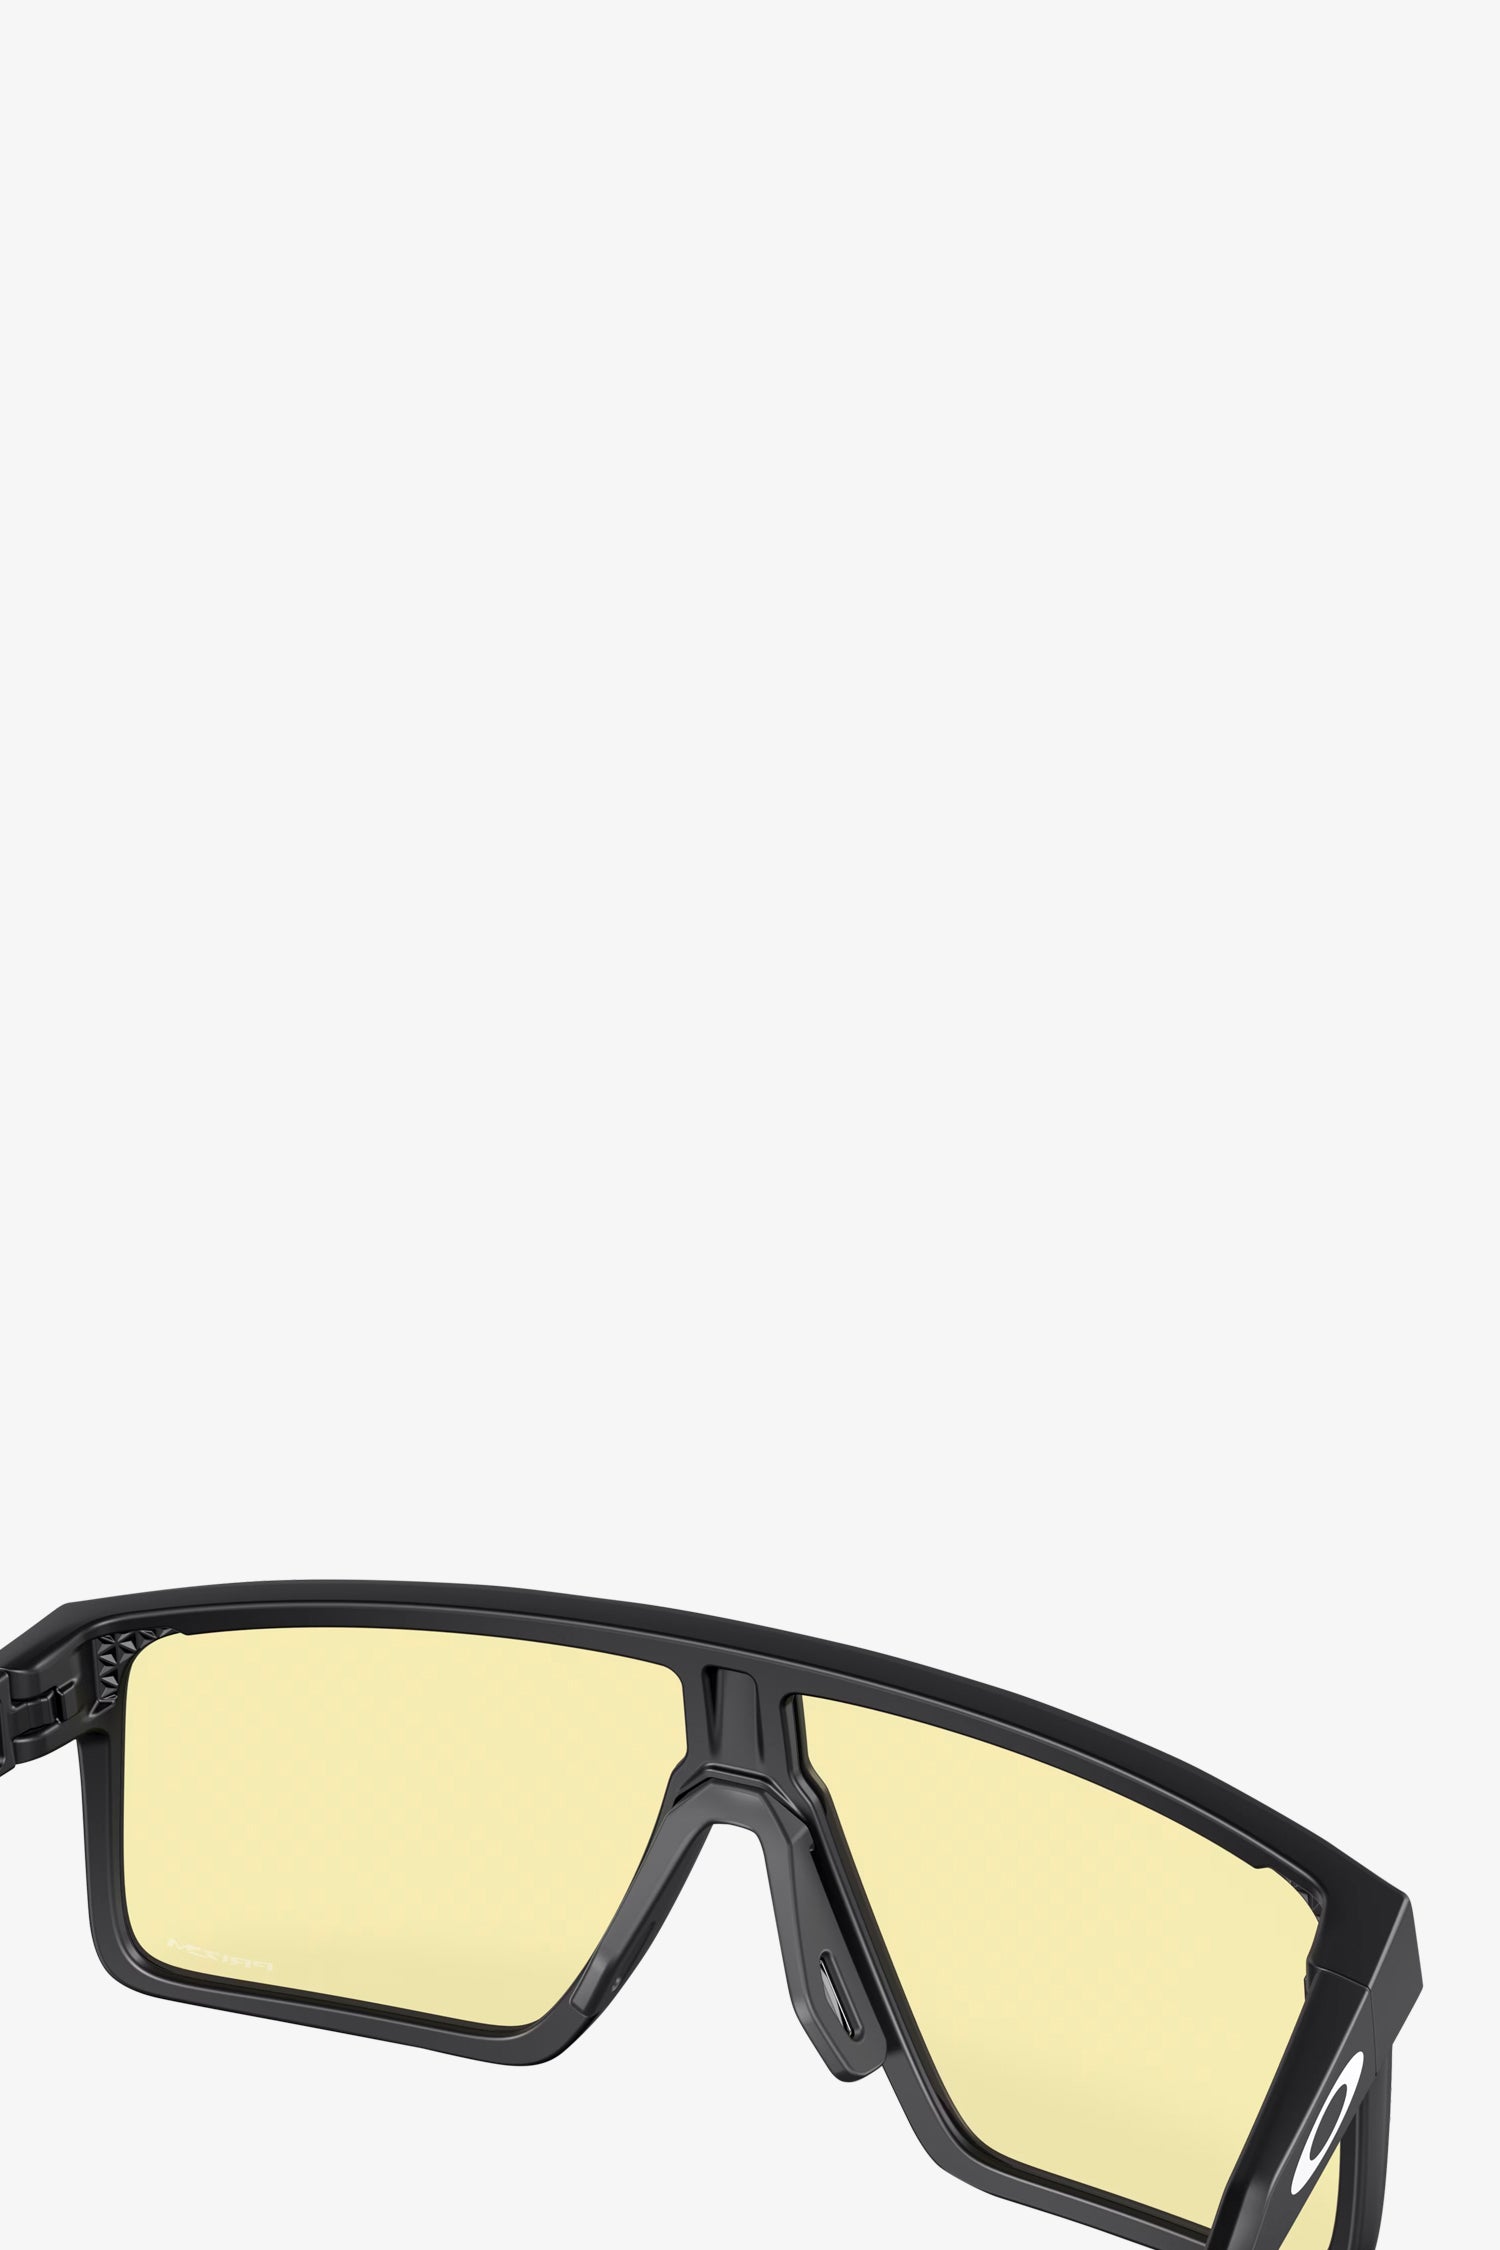 Helux Gaming Collection Sunglasses- Selectshop FRAME